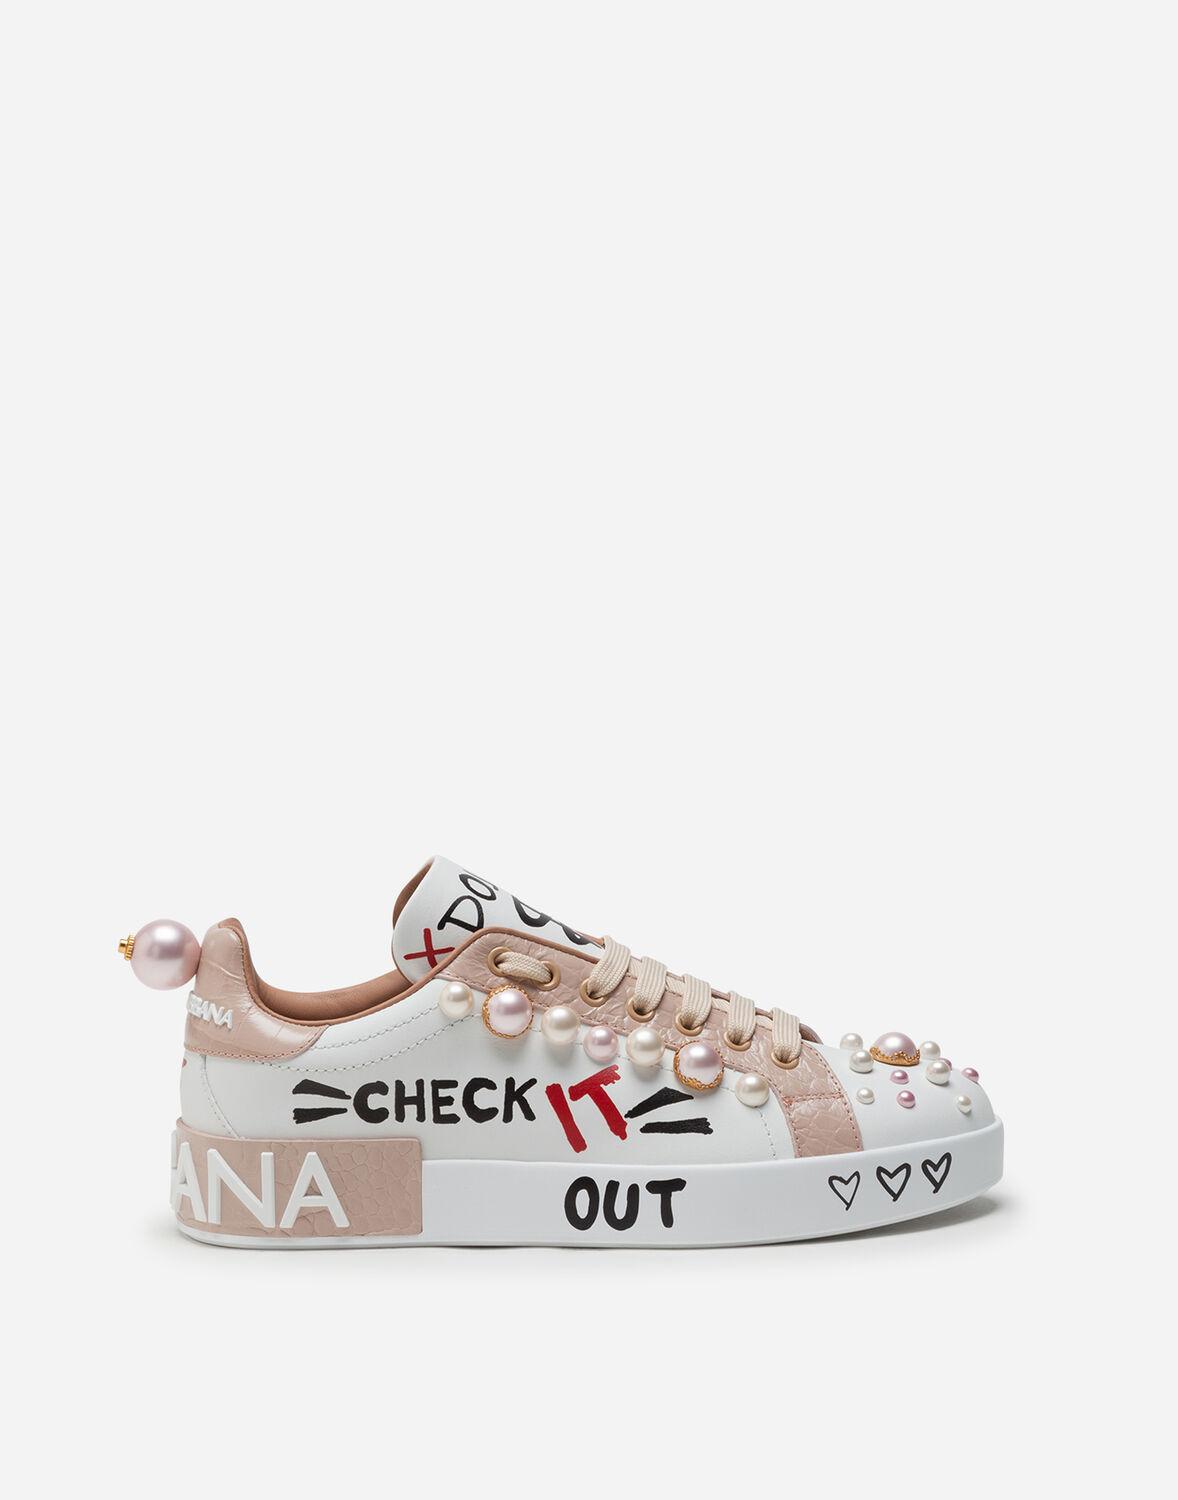 Dolce & Gabbana Printed Nappa Calfskin Portofino Sneakers With Pearl  Embroidery in White | Lyst